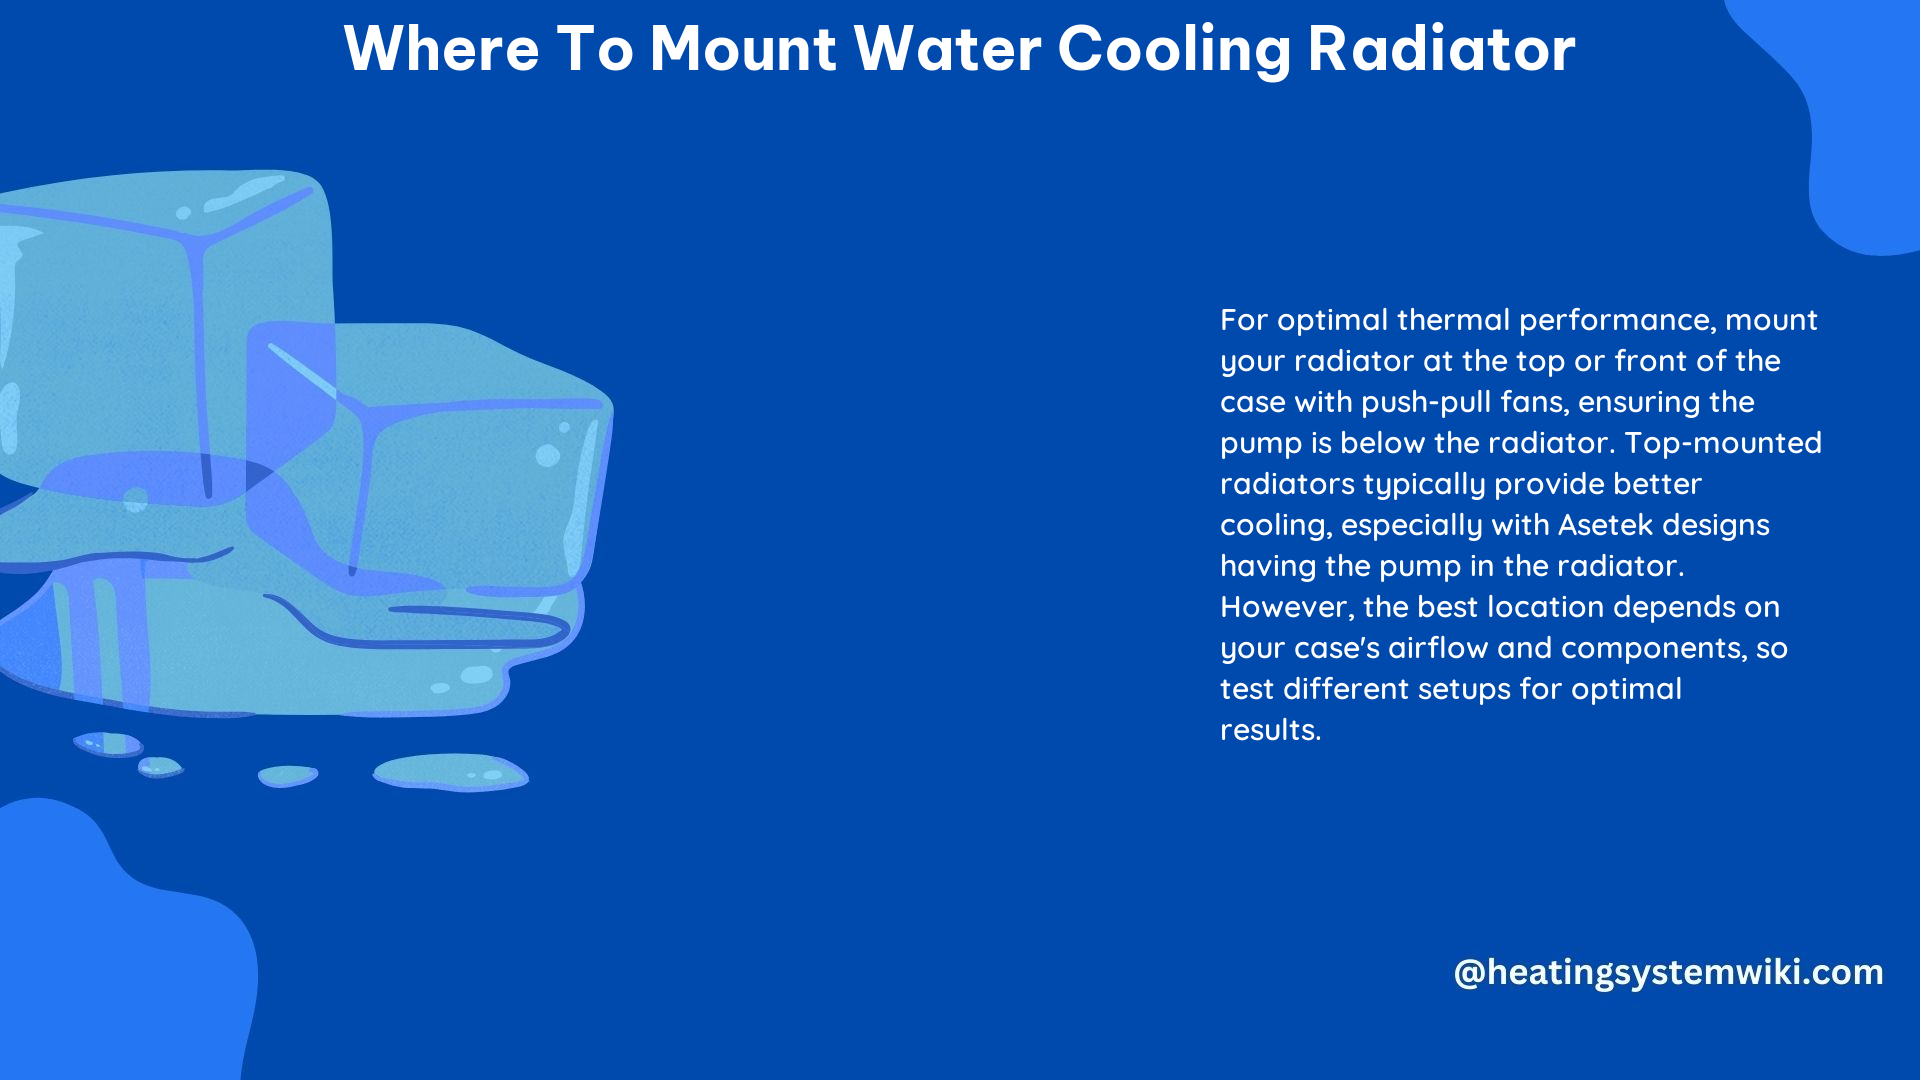 Where to Mount Water Cooling Radiator